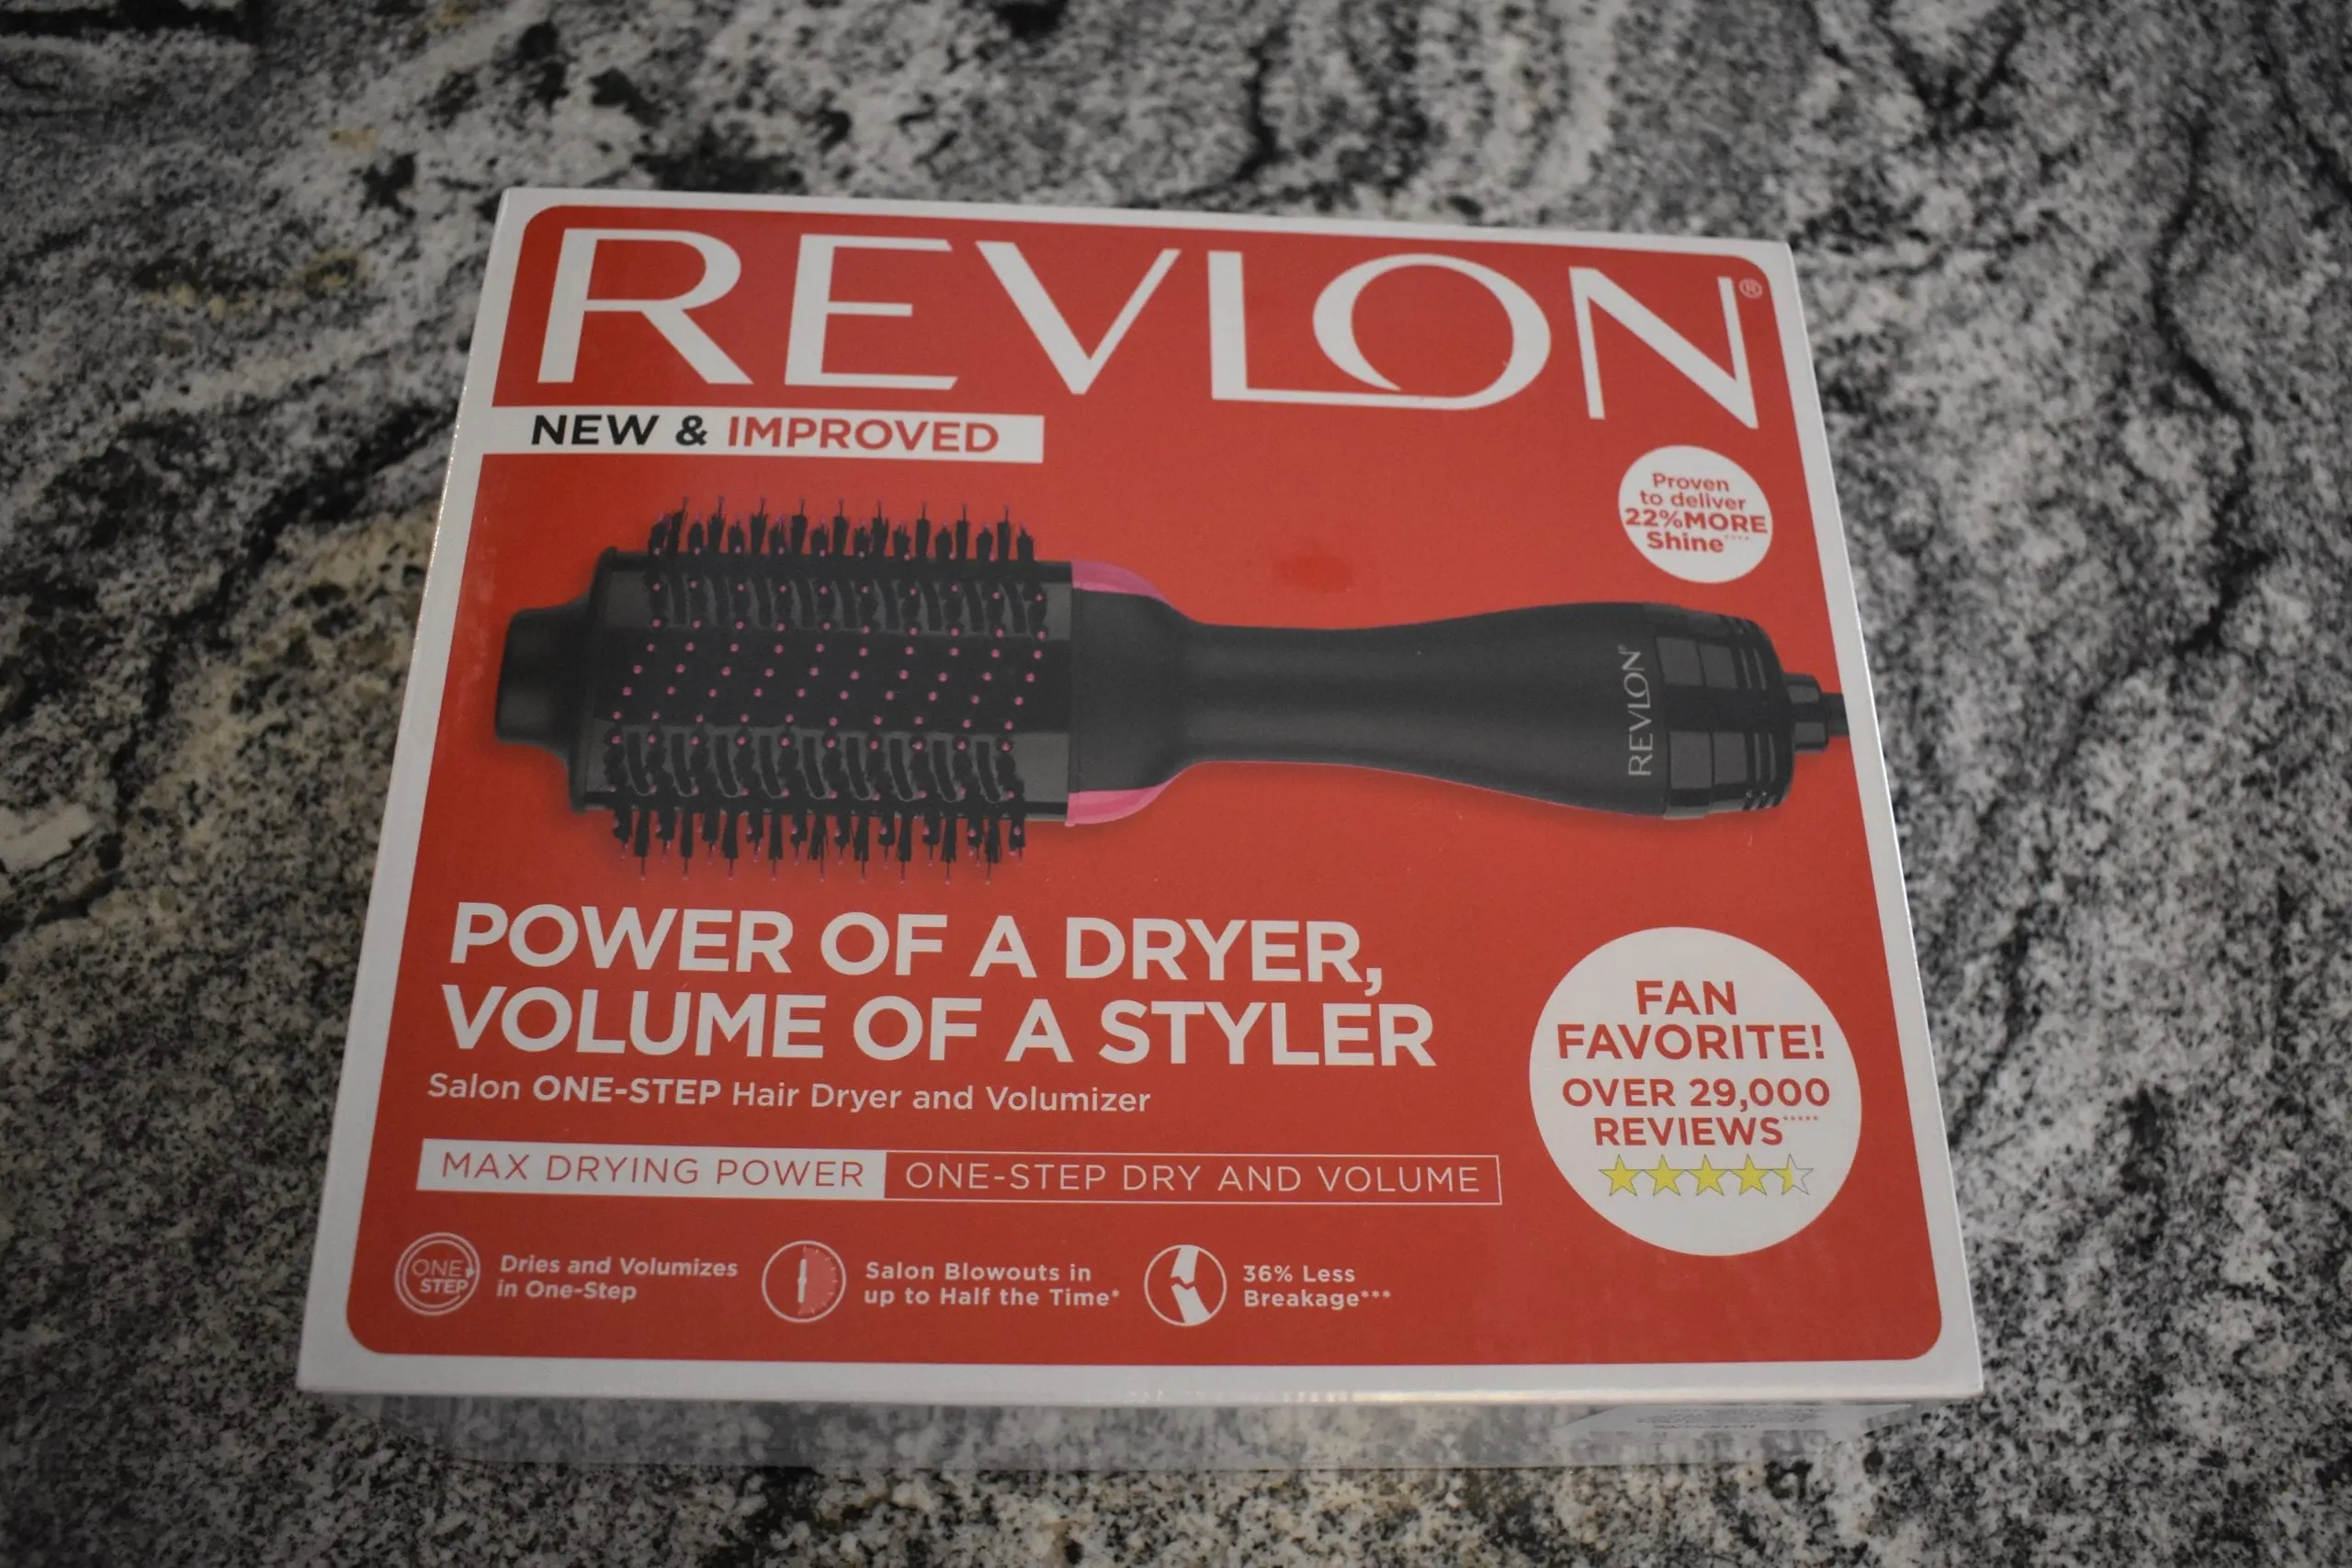 The Revlon all-in-one volumizing hair brush in its red box